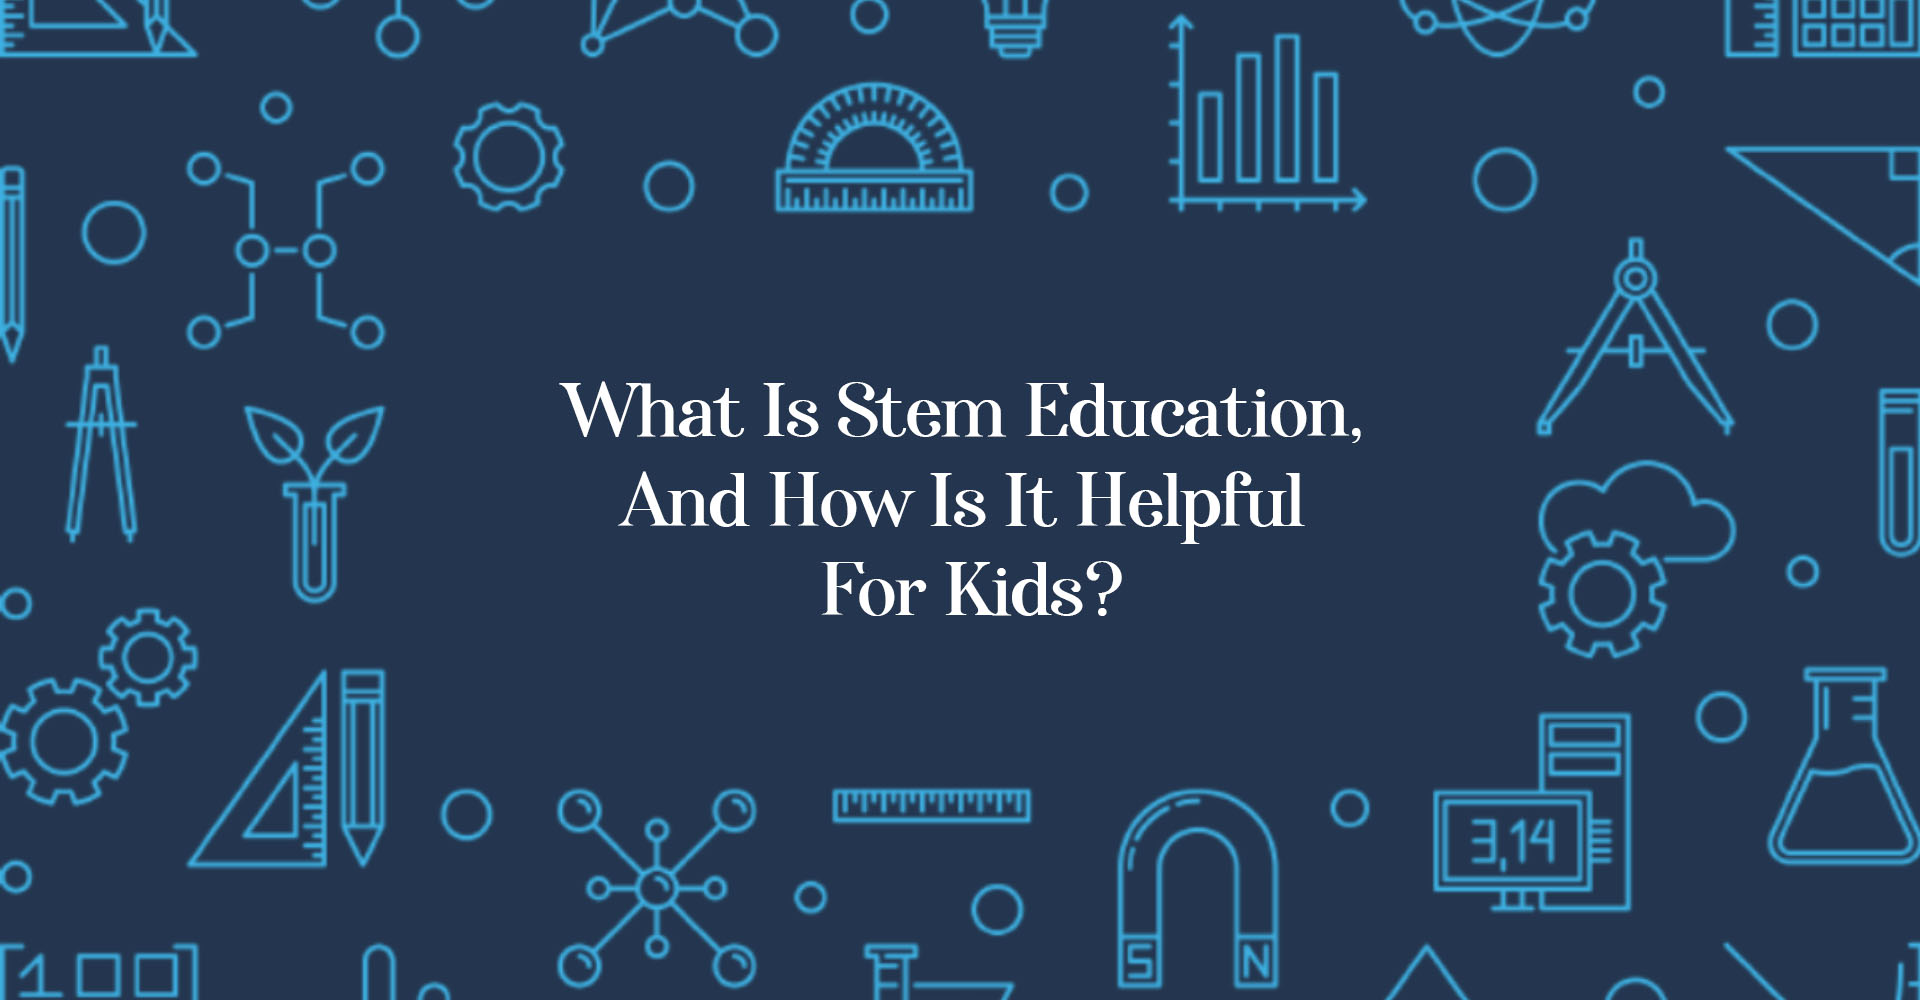 What Is Stem Education, And How Is It Helpful For Kids?